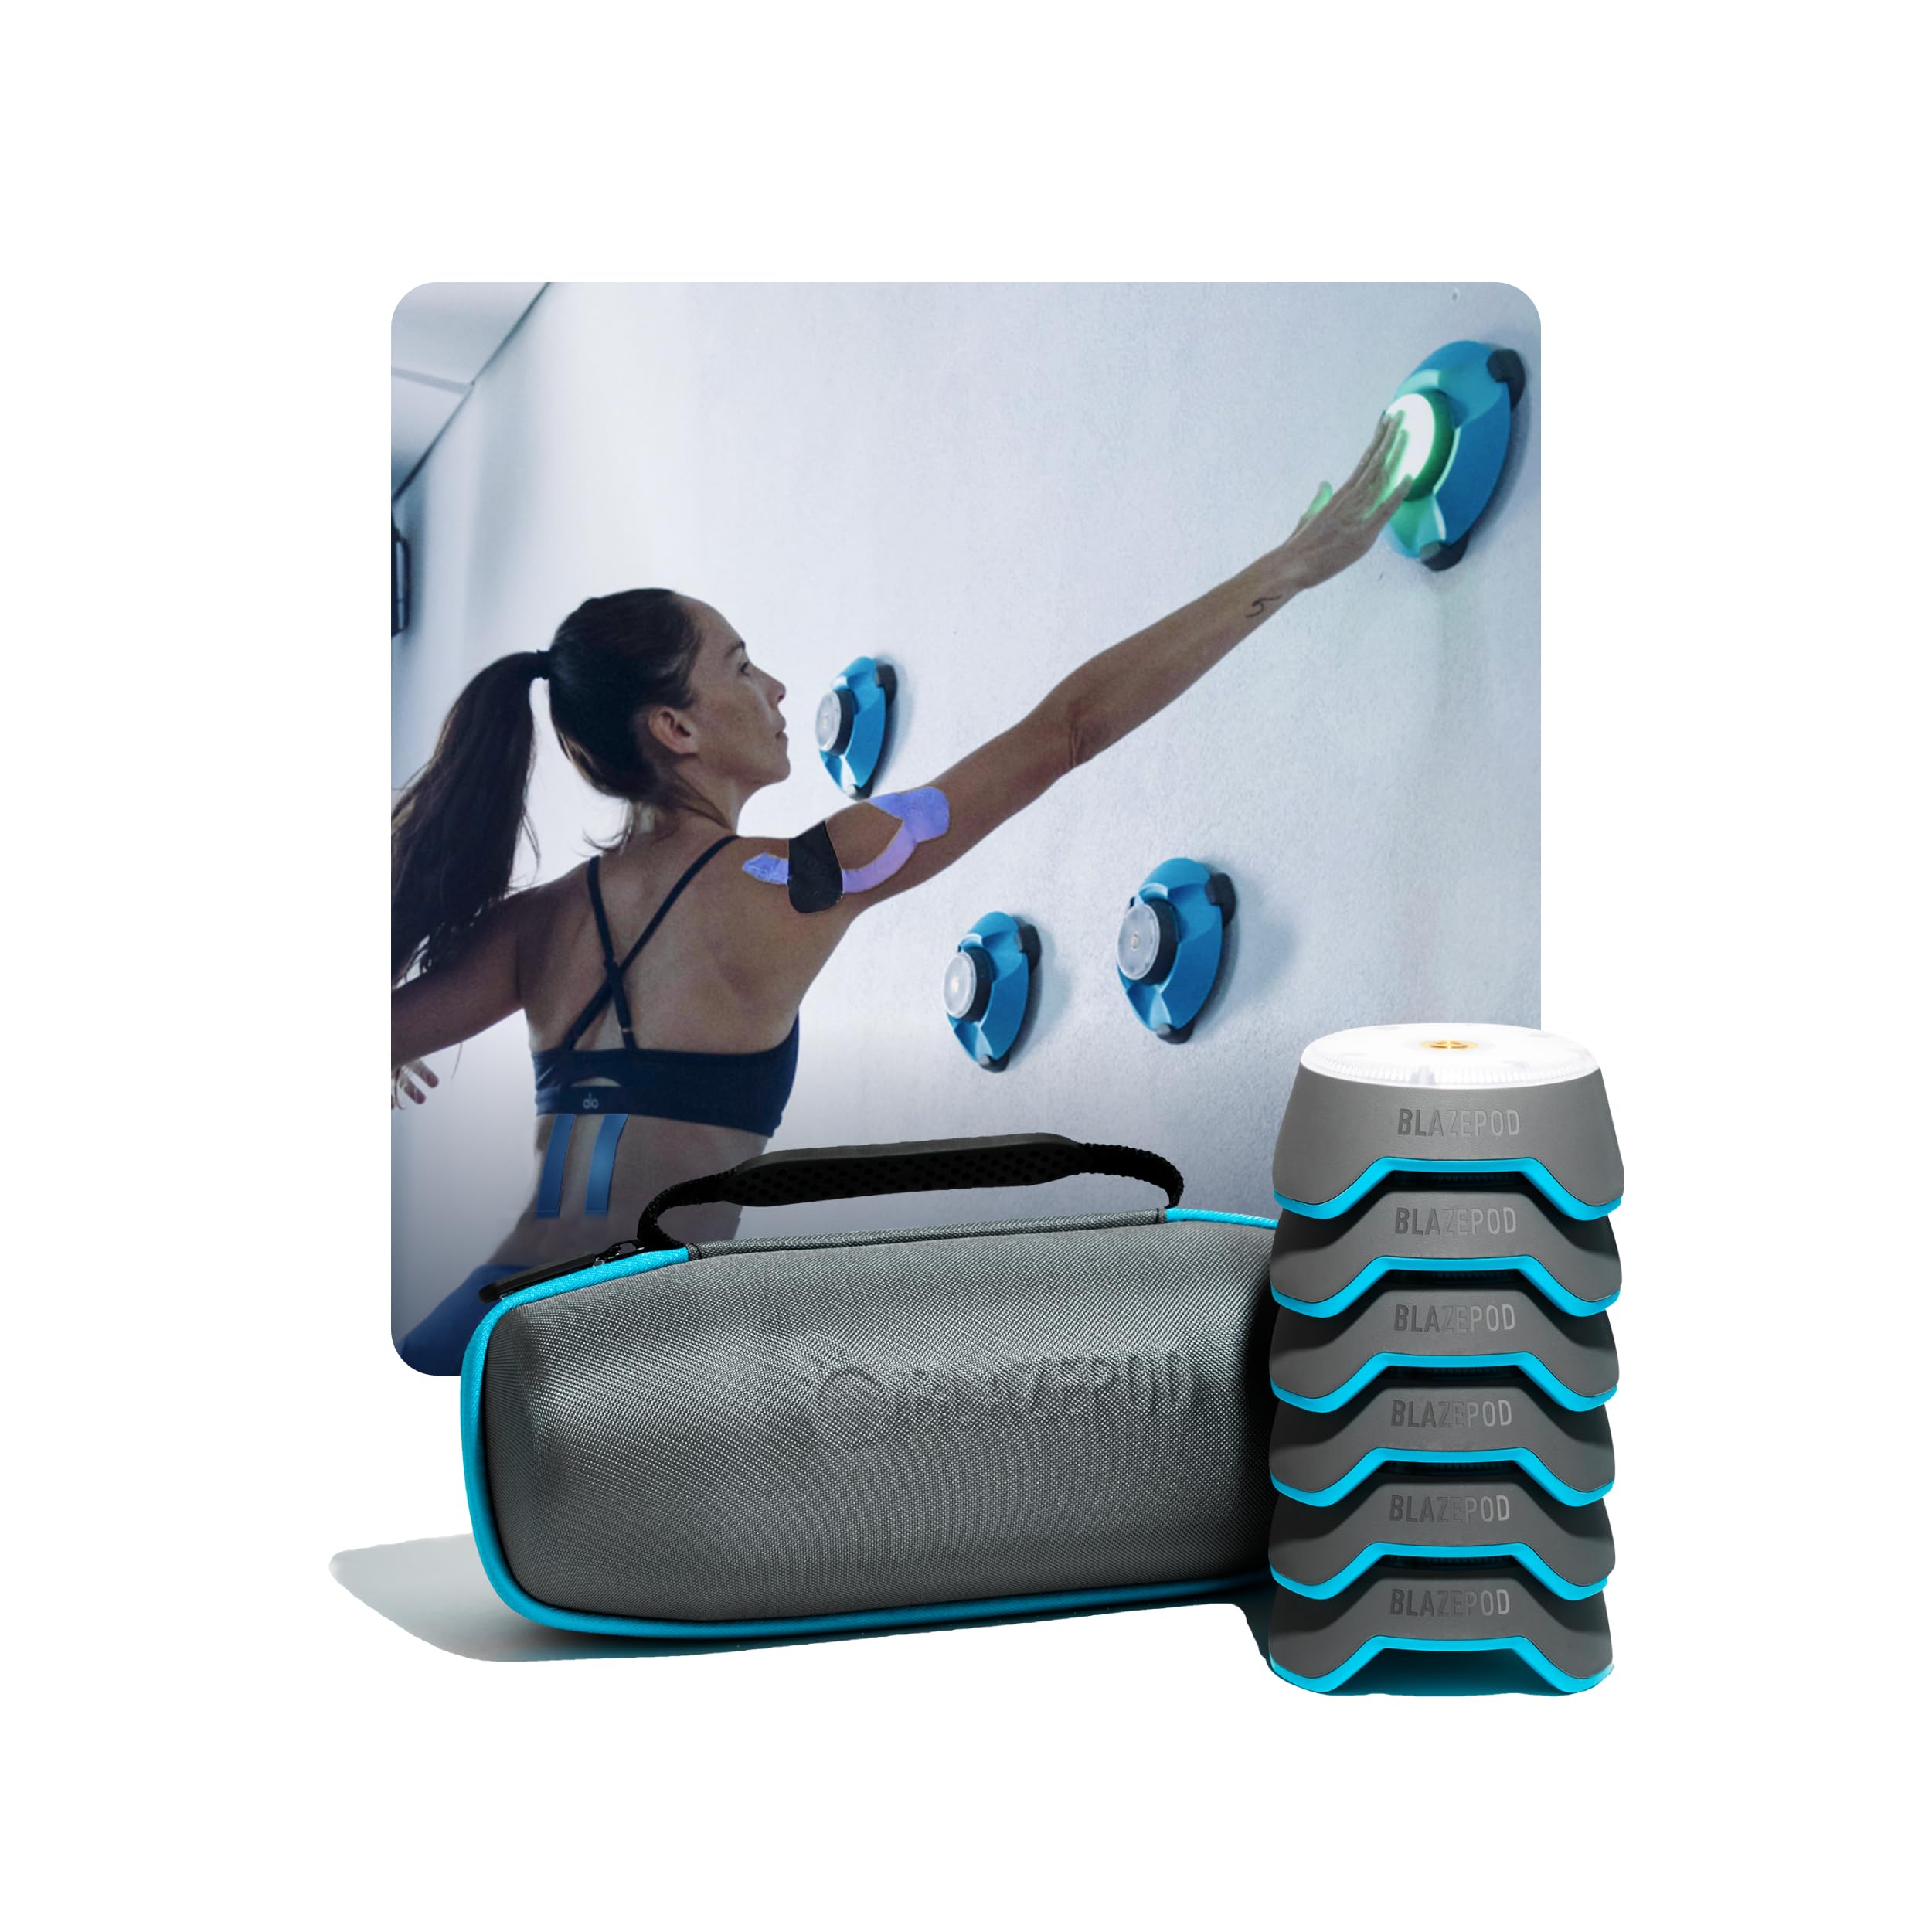 BlazePod Reaction Training Platform for Physical Cognitive Therapy for Athletes Trainers Coaches Physical neurological